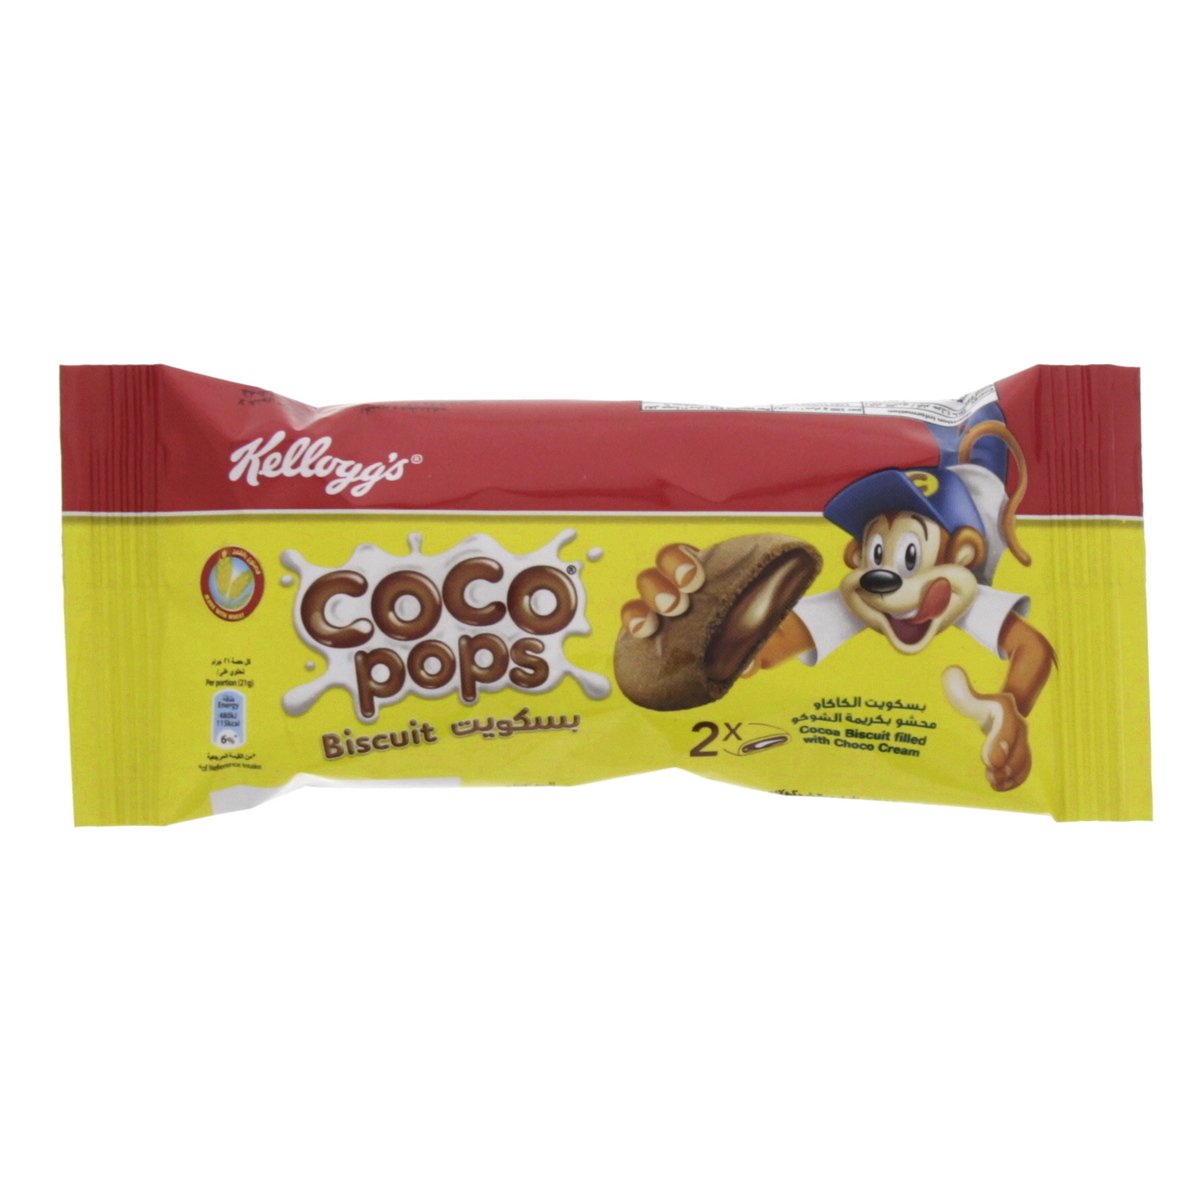 Kellogg's Coco Pops Biscuit Cocoa Biscuit Filled With Choco Cream 21 g